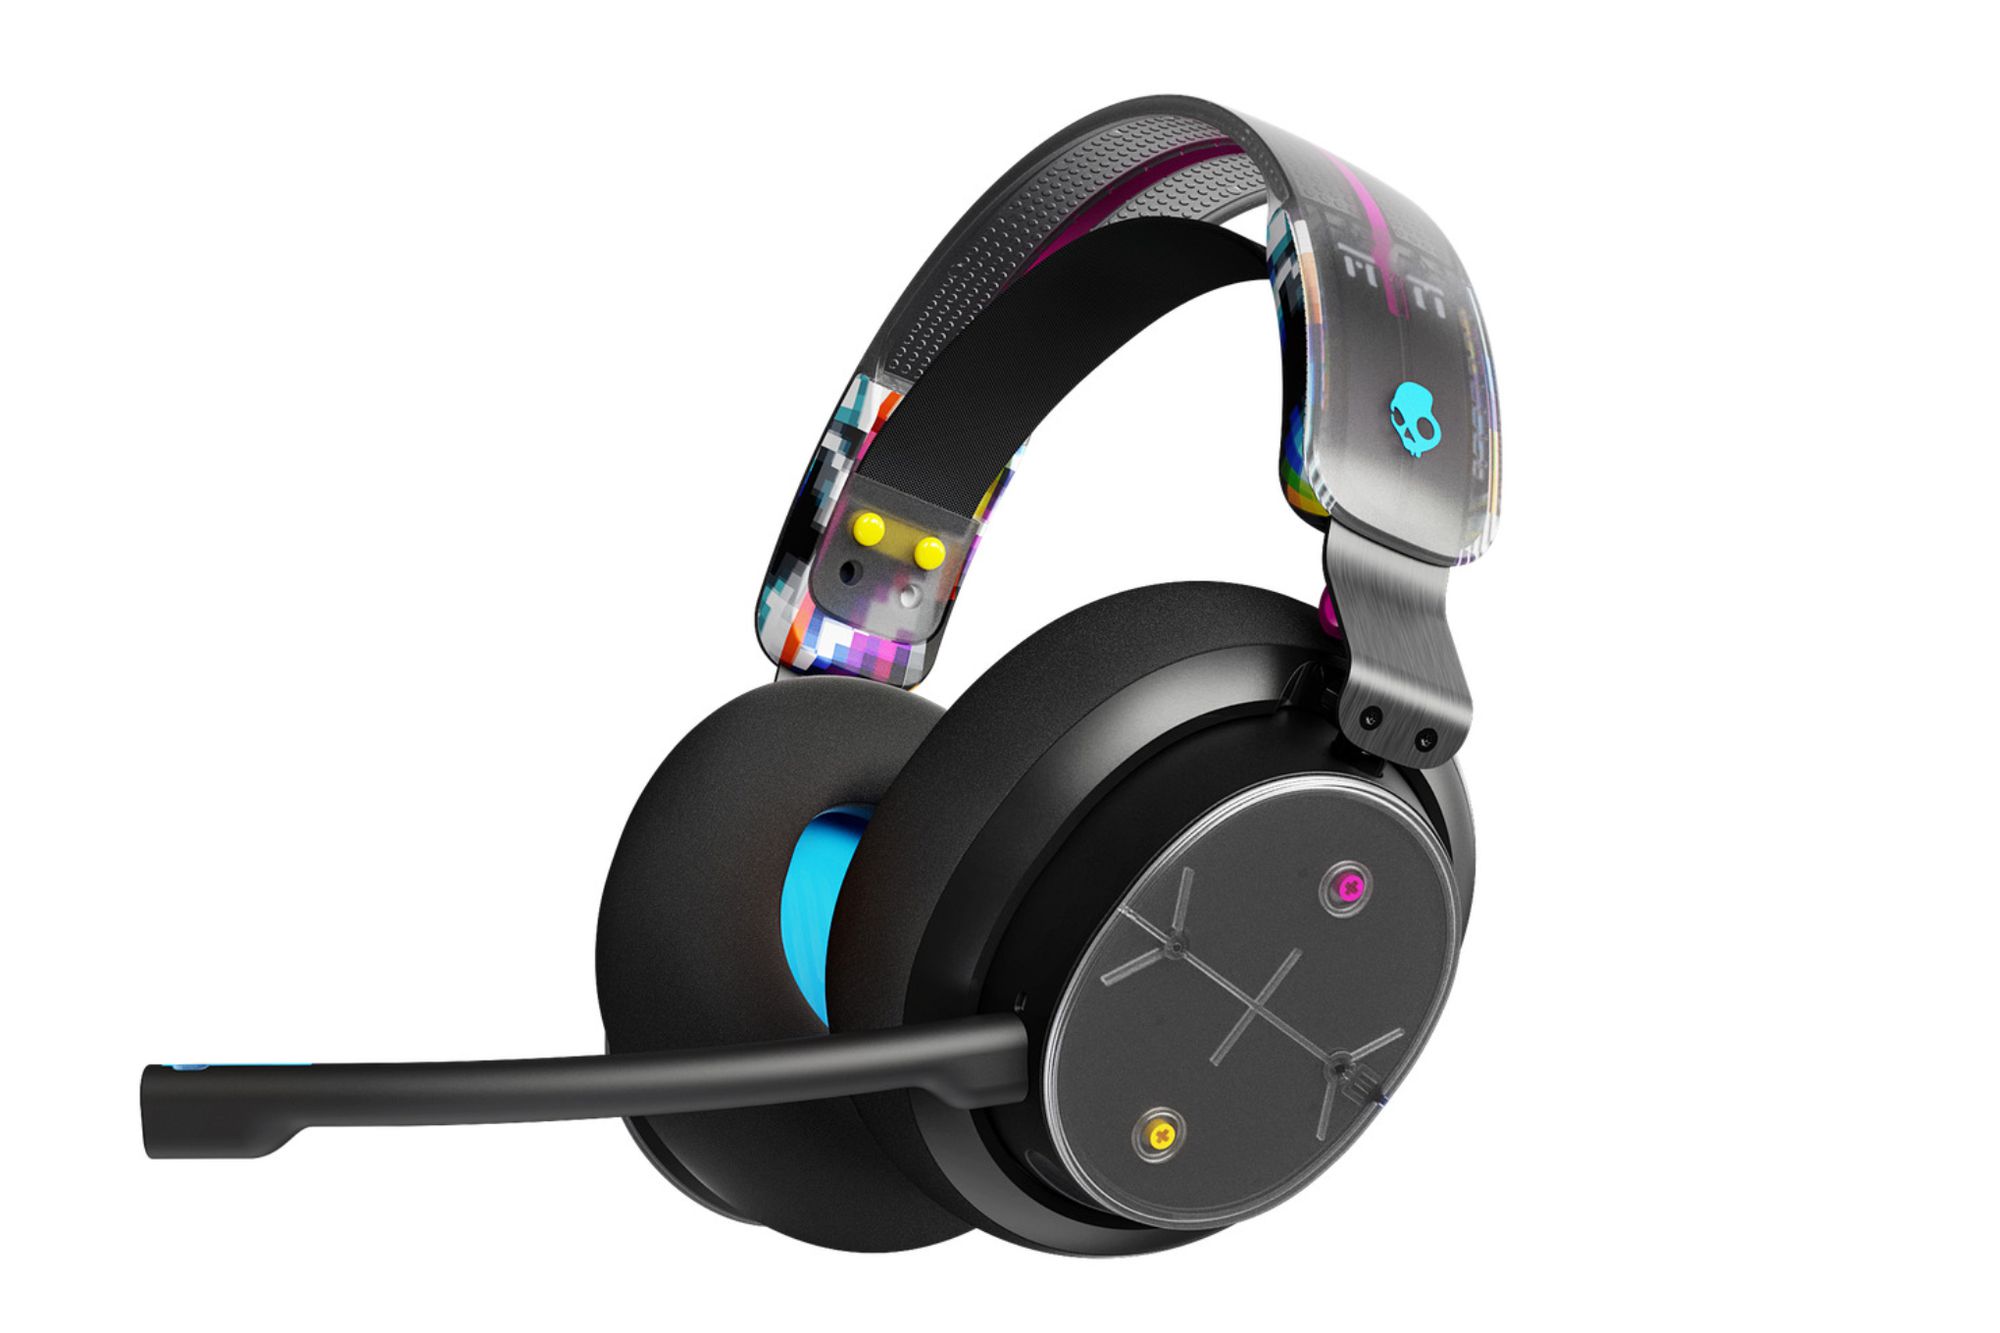 Skullcandy's new headset has a quirky design and Tile - The